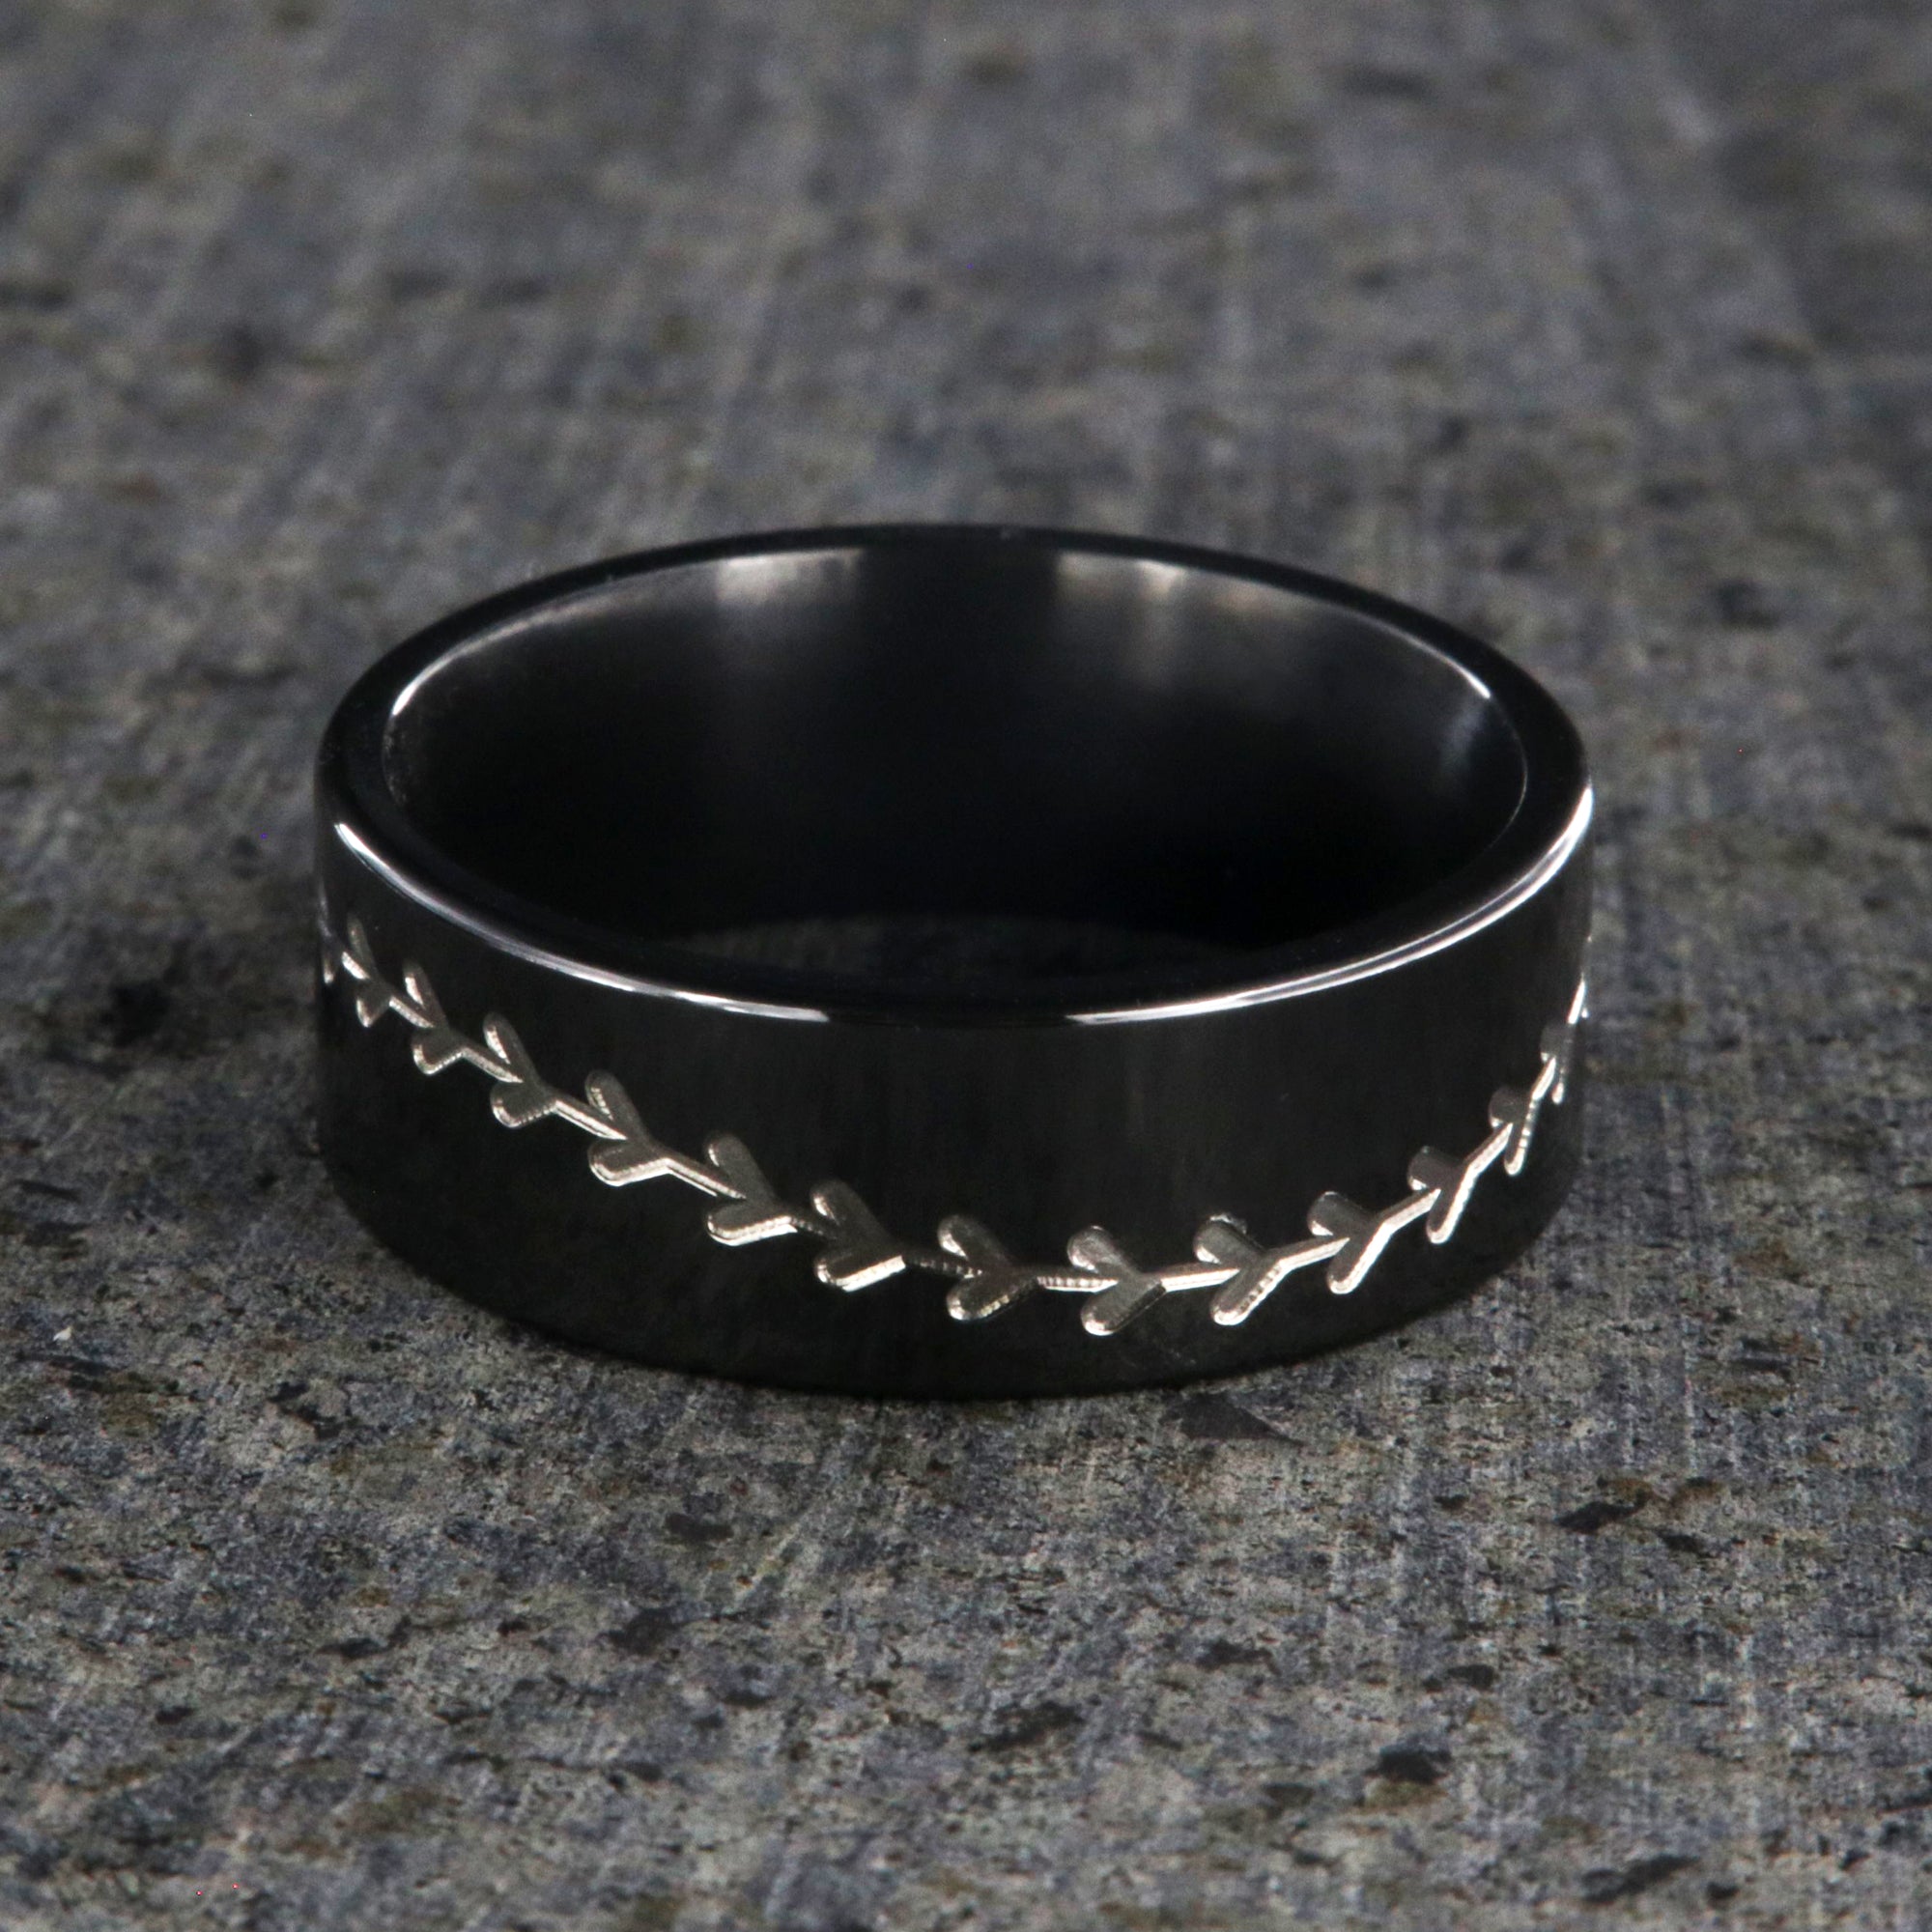 8mm wide black zirconium baseball ring with a flat profile and a two-tone baseball stitching